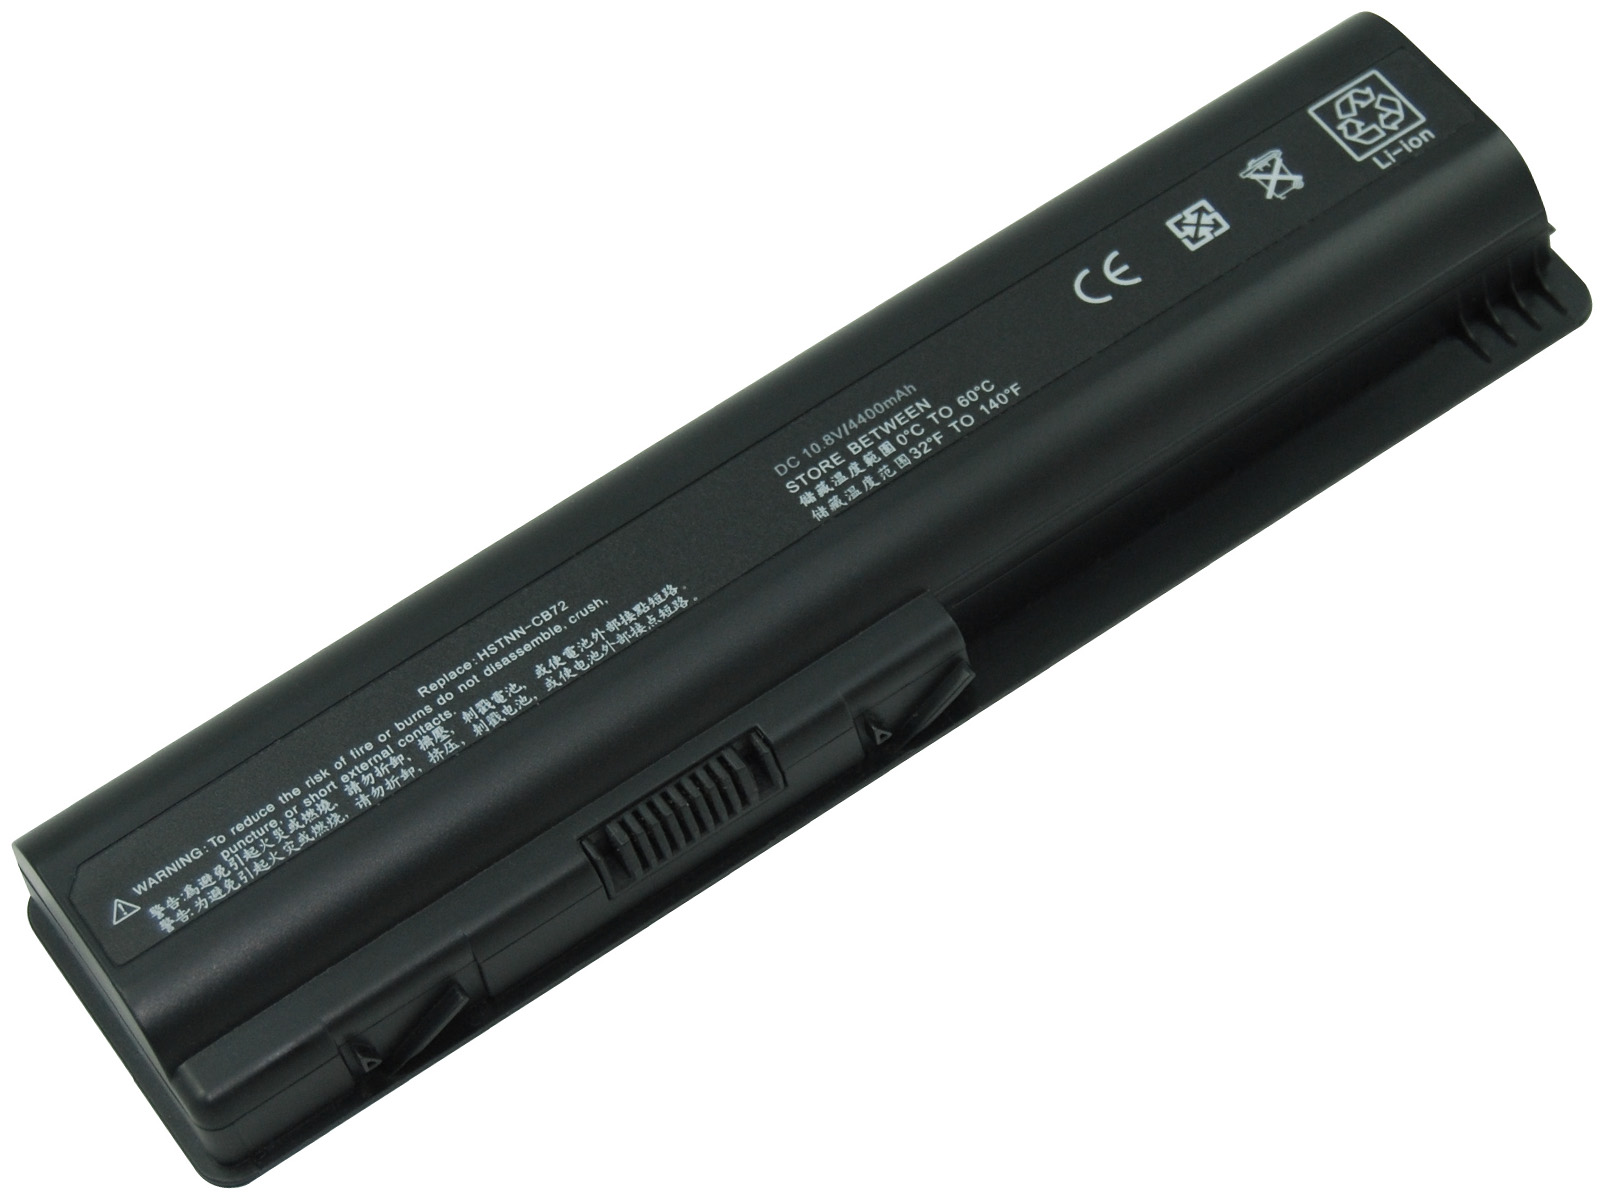 Superb Choice  6-cell HP Compaq 484170-001 Laptop Battery Laptop Battery - image 1 of 1